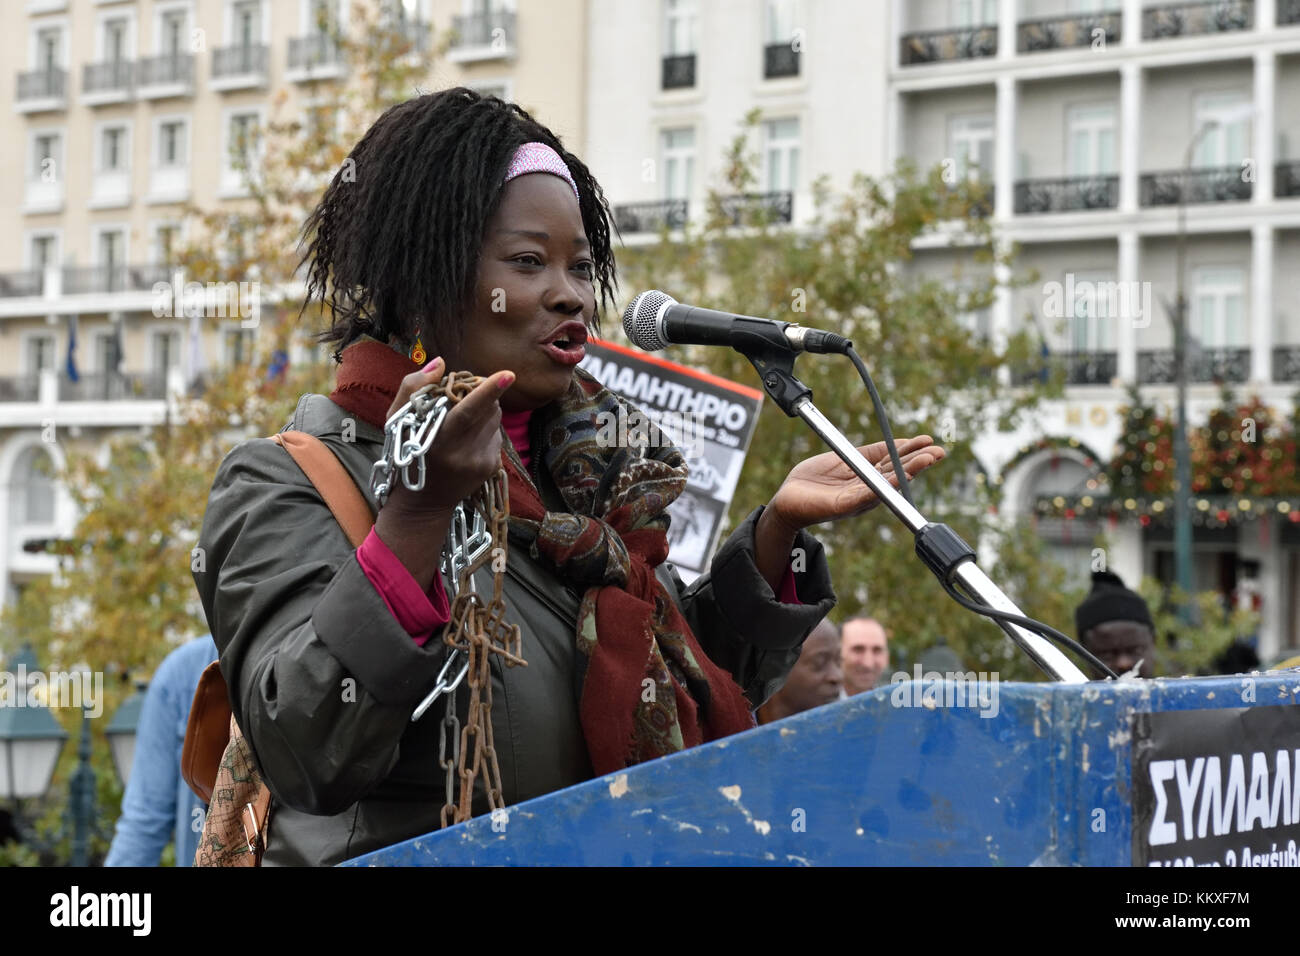 Athens, Greece. 2nd Dec, 2017. A speaker with chained hands addresses protesters during the rally against slave trade in Africa, in Athens, Greece. Credit: Nicolas Koutsokostas/Alamy Live News. Stock Photo